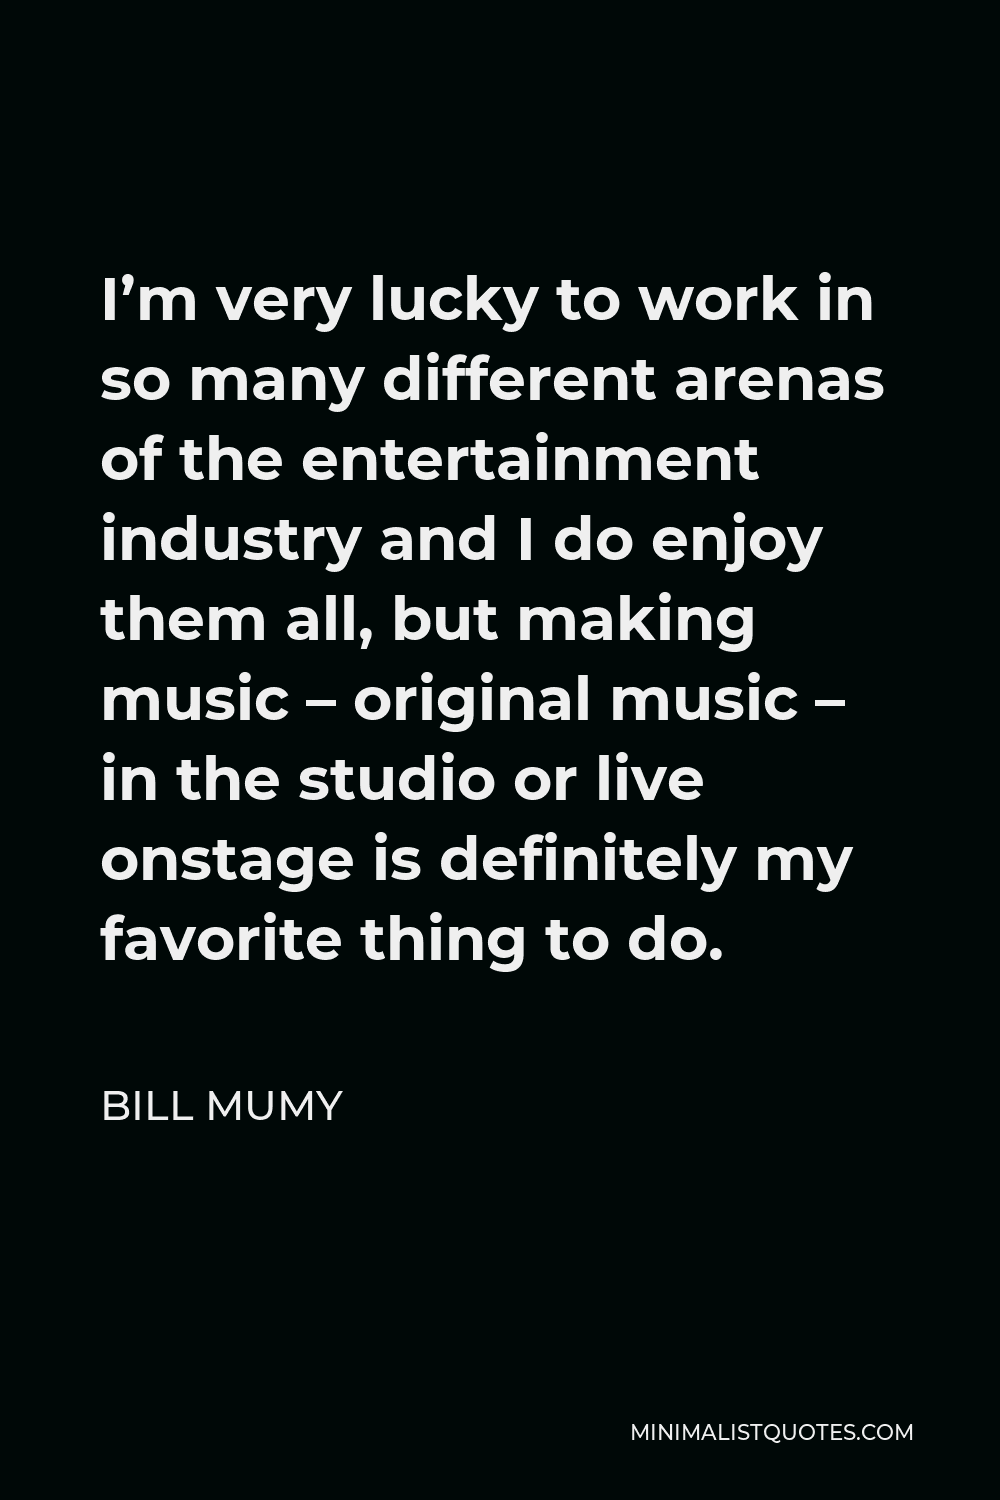 Bill Mumy Quote - I’m very lucky to work in so many different arenas of the entertainment industry and I do enjoy them all, but making music – original music – in the studio or live onstage is definitely my favorite thing to do.